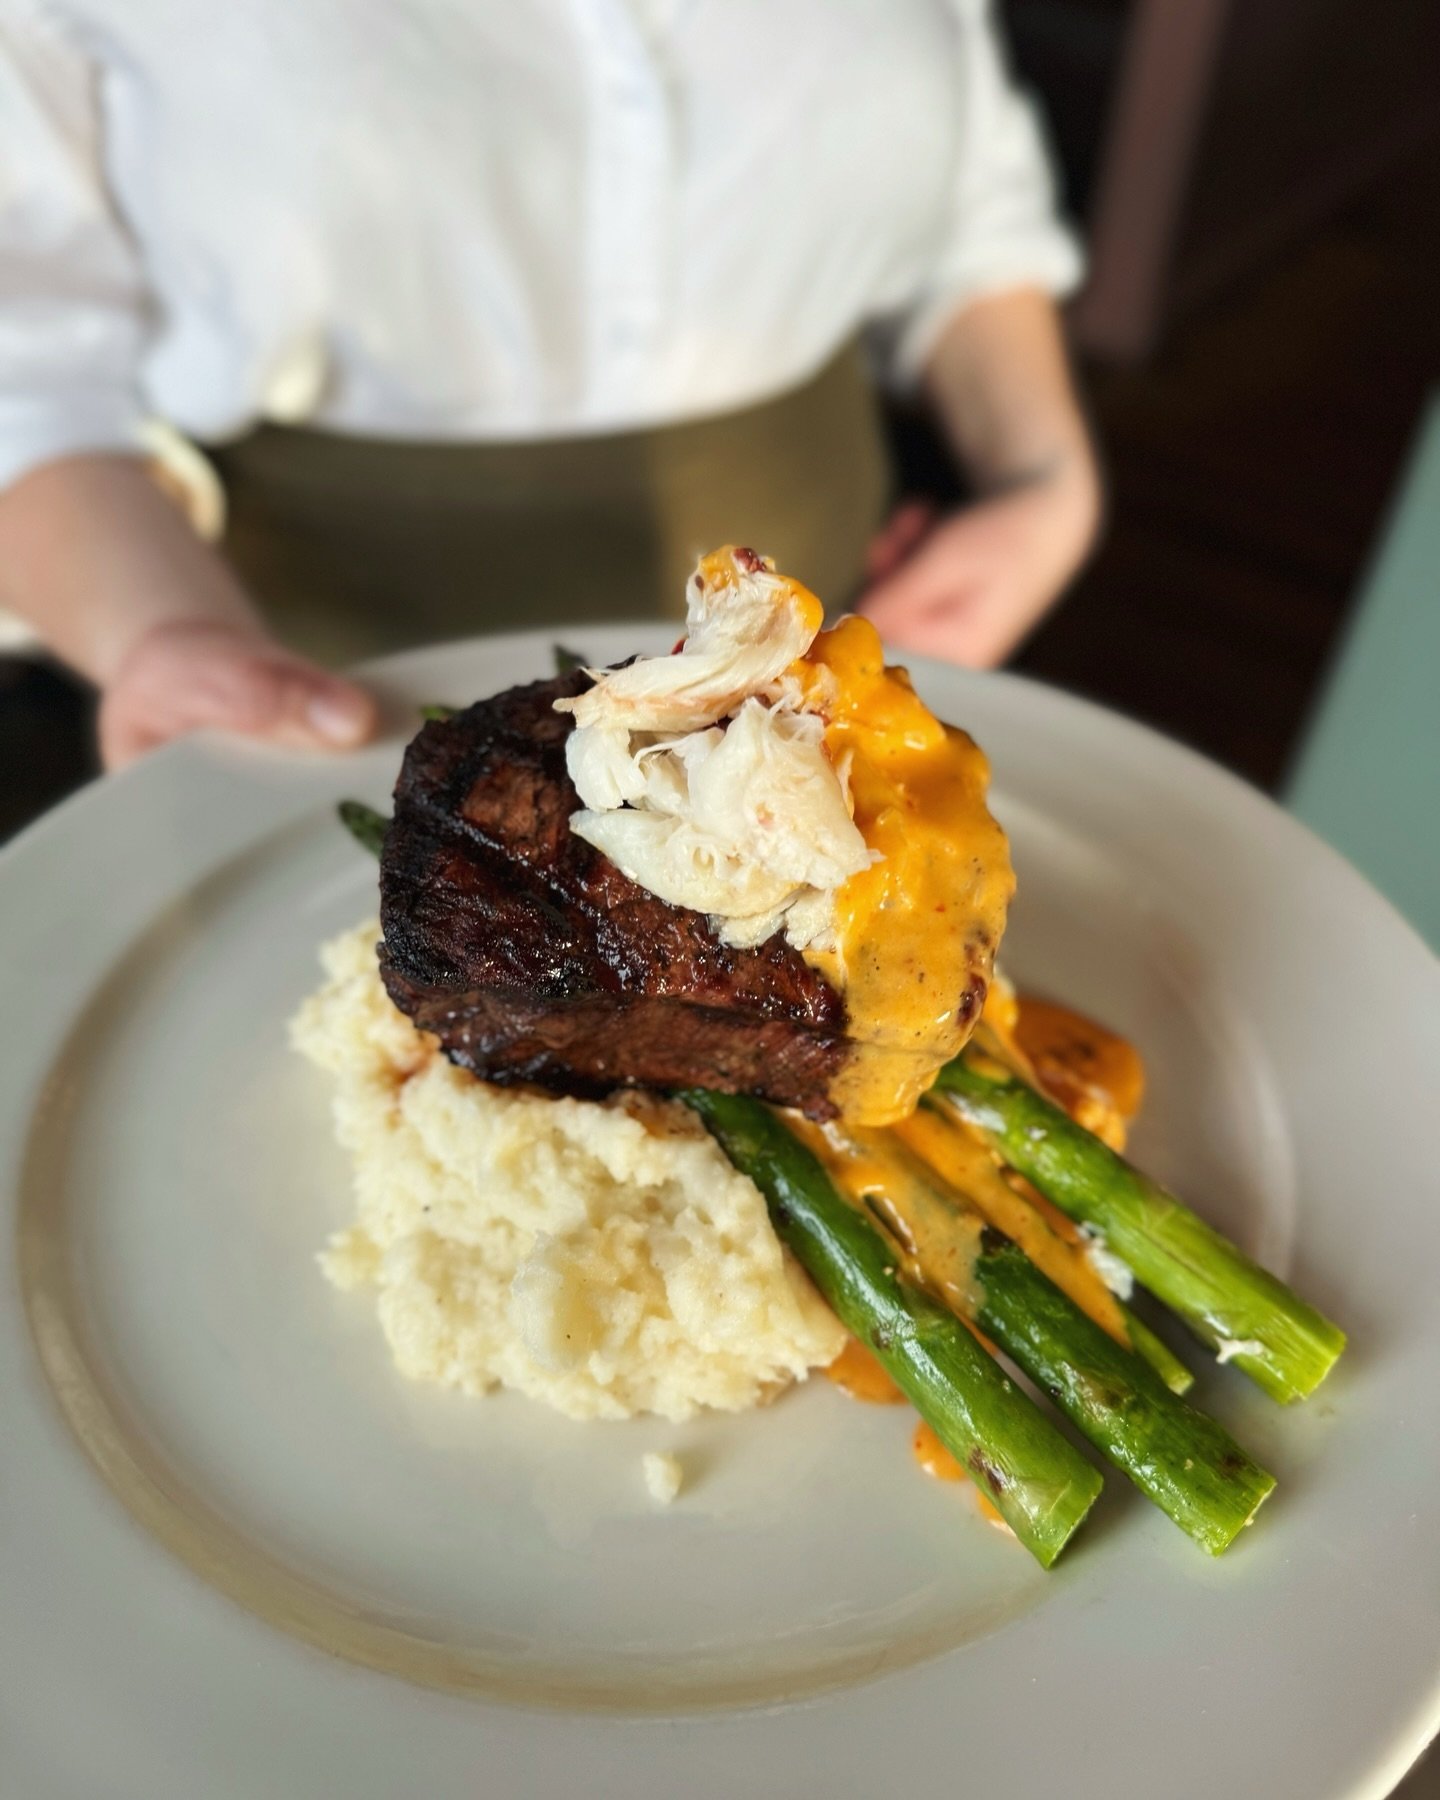 We know what we&rsquo;re having for dinner&hellip; our filet Oscar with brie mashed potatoes is tender and so flavorful! Send this to your steak loving dinner partner in crime 😘